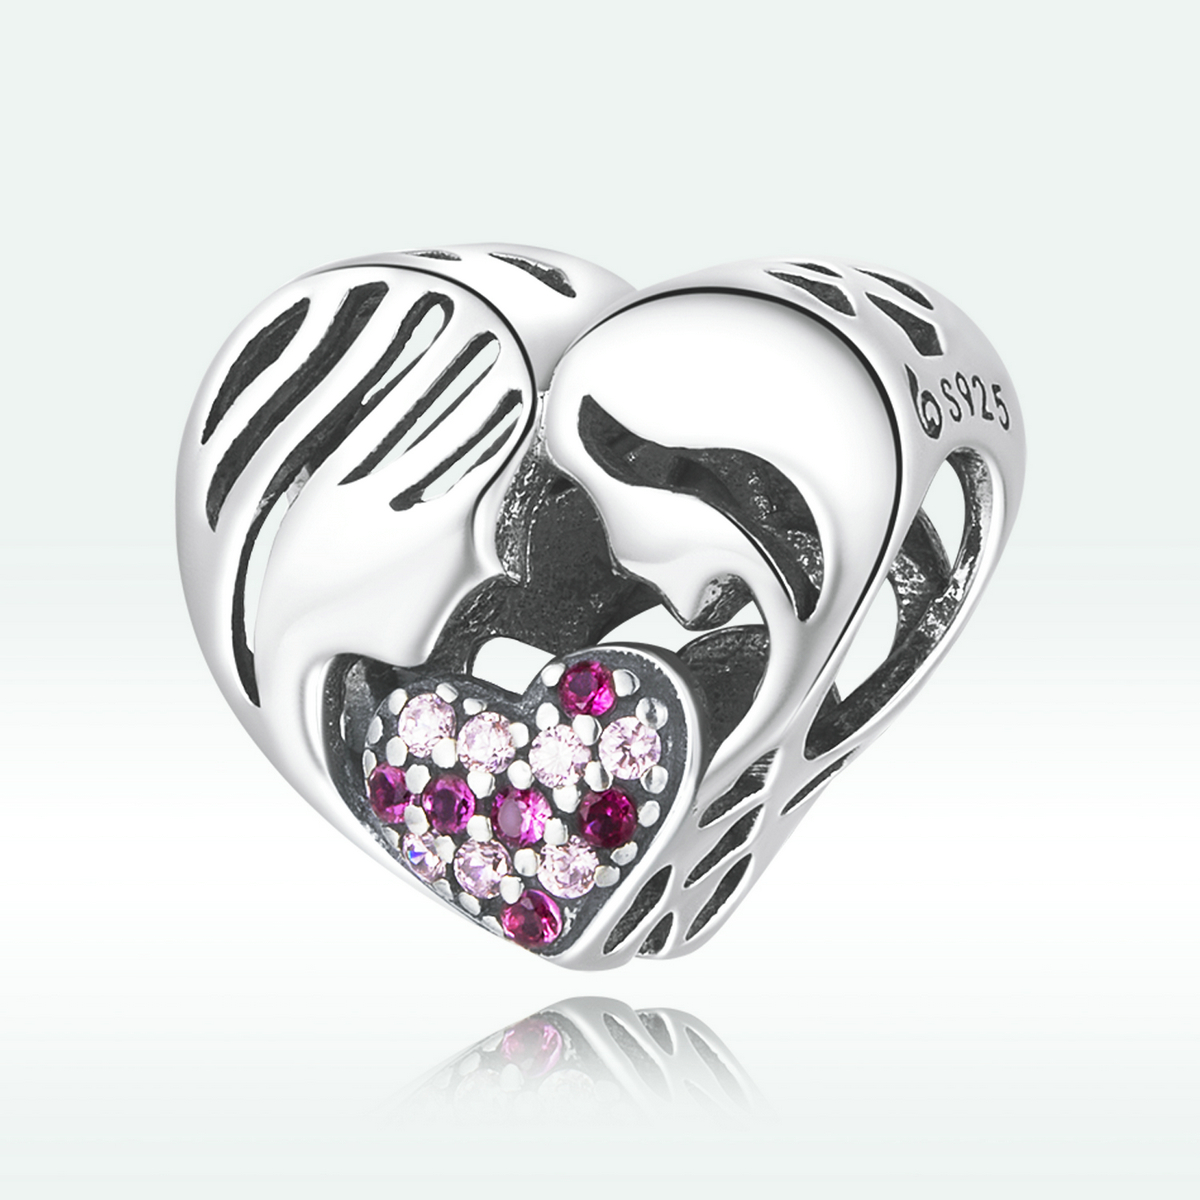 pandora style mother and daughter love silhouette charm bsc575